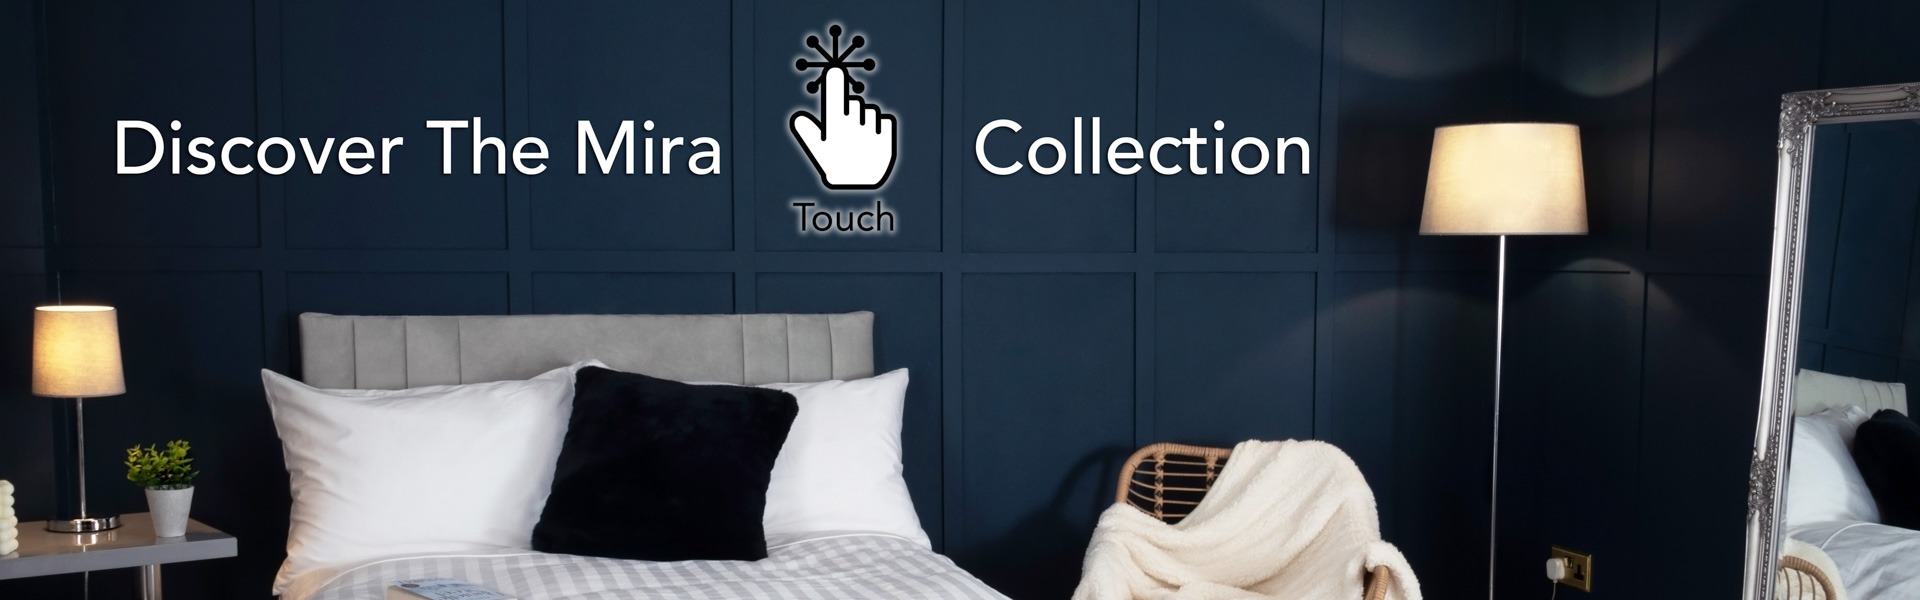 Discover the Mira touch collection